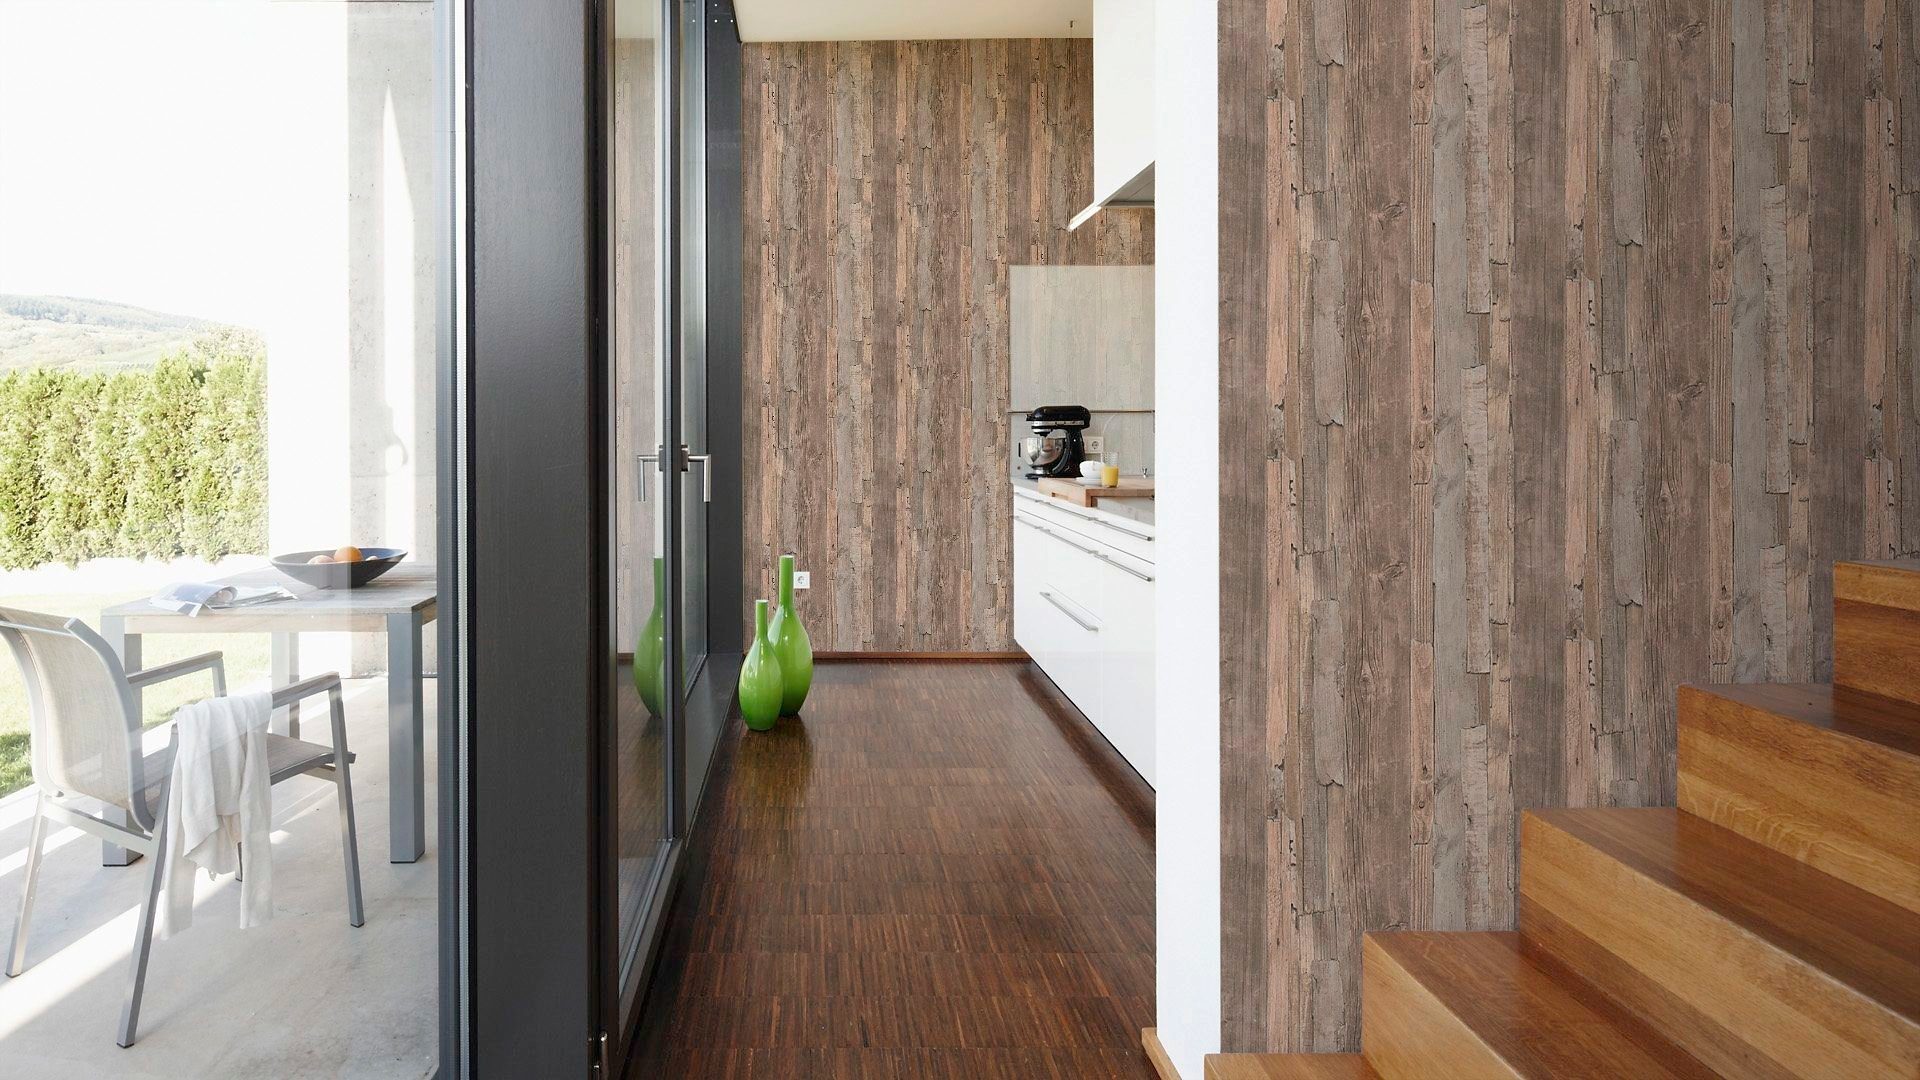 A.S. Création living walls Stone Vliestapete 2nd Landhaus beige/braun Tapete Holz, Wood`n Edition, Best of